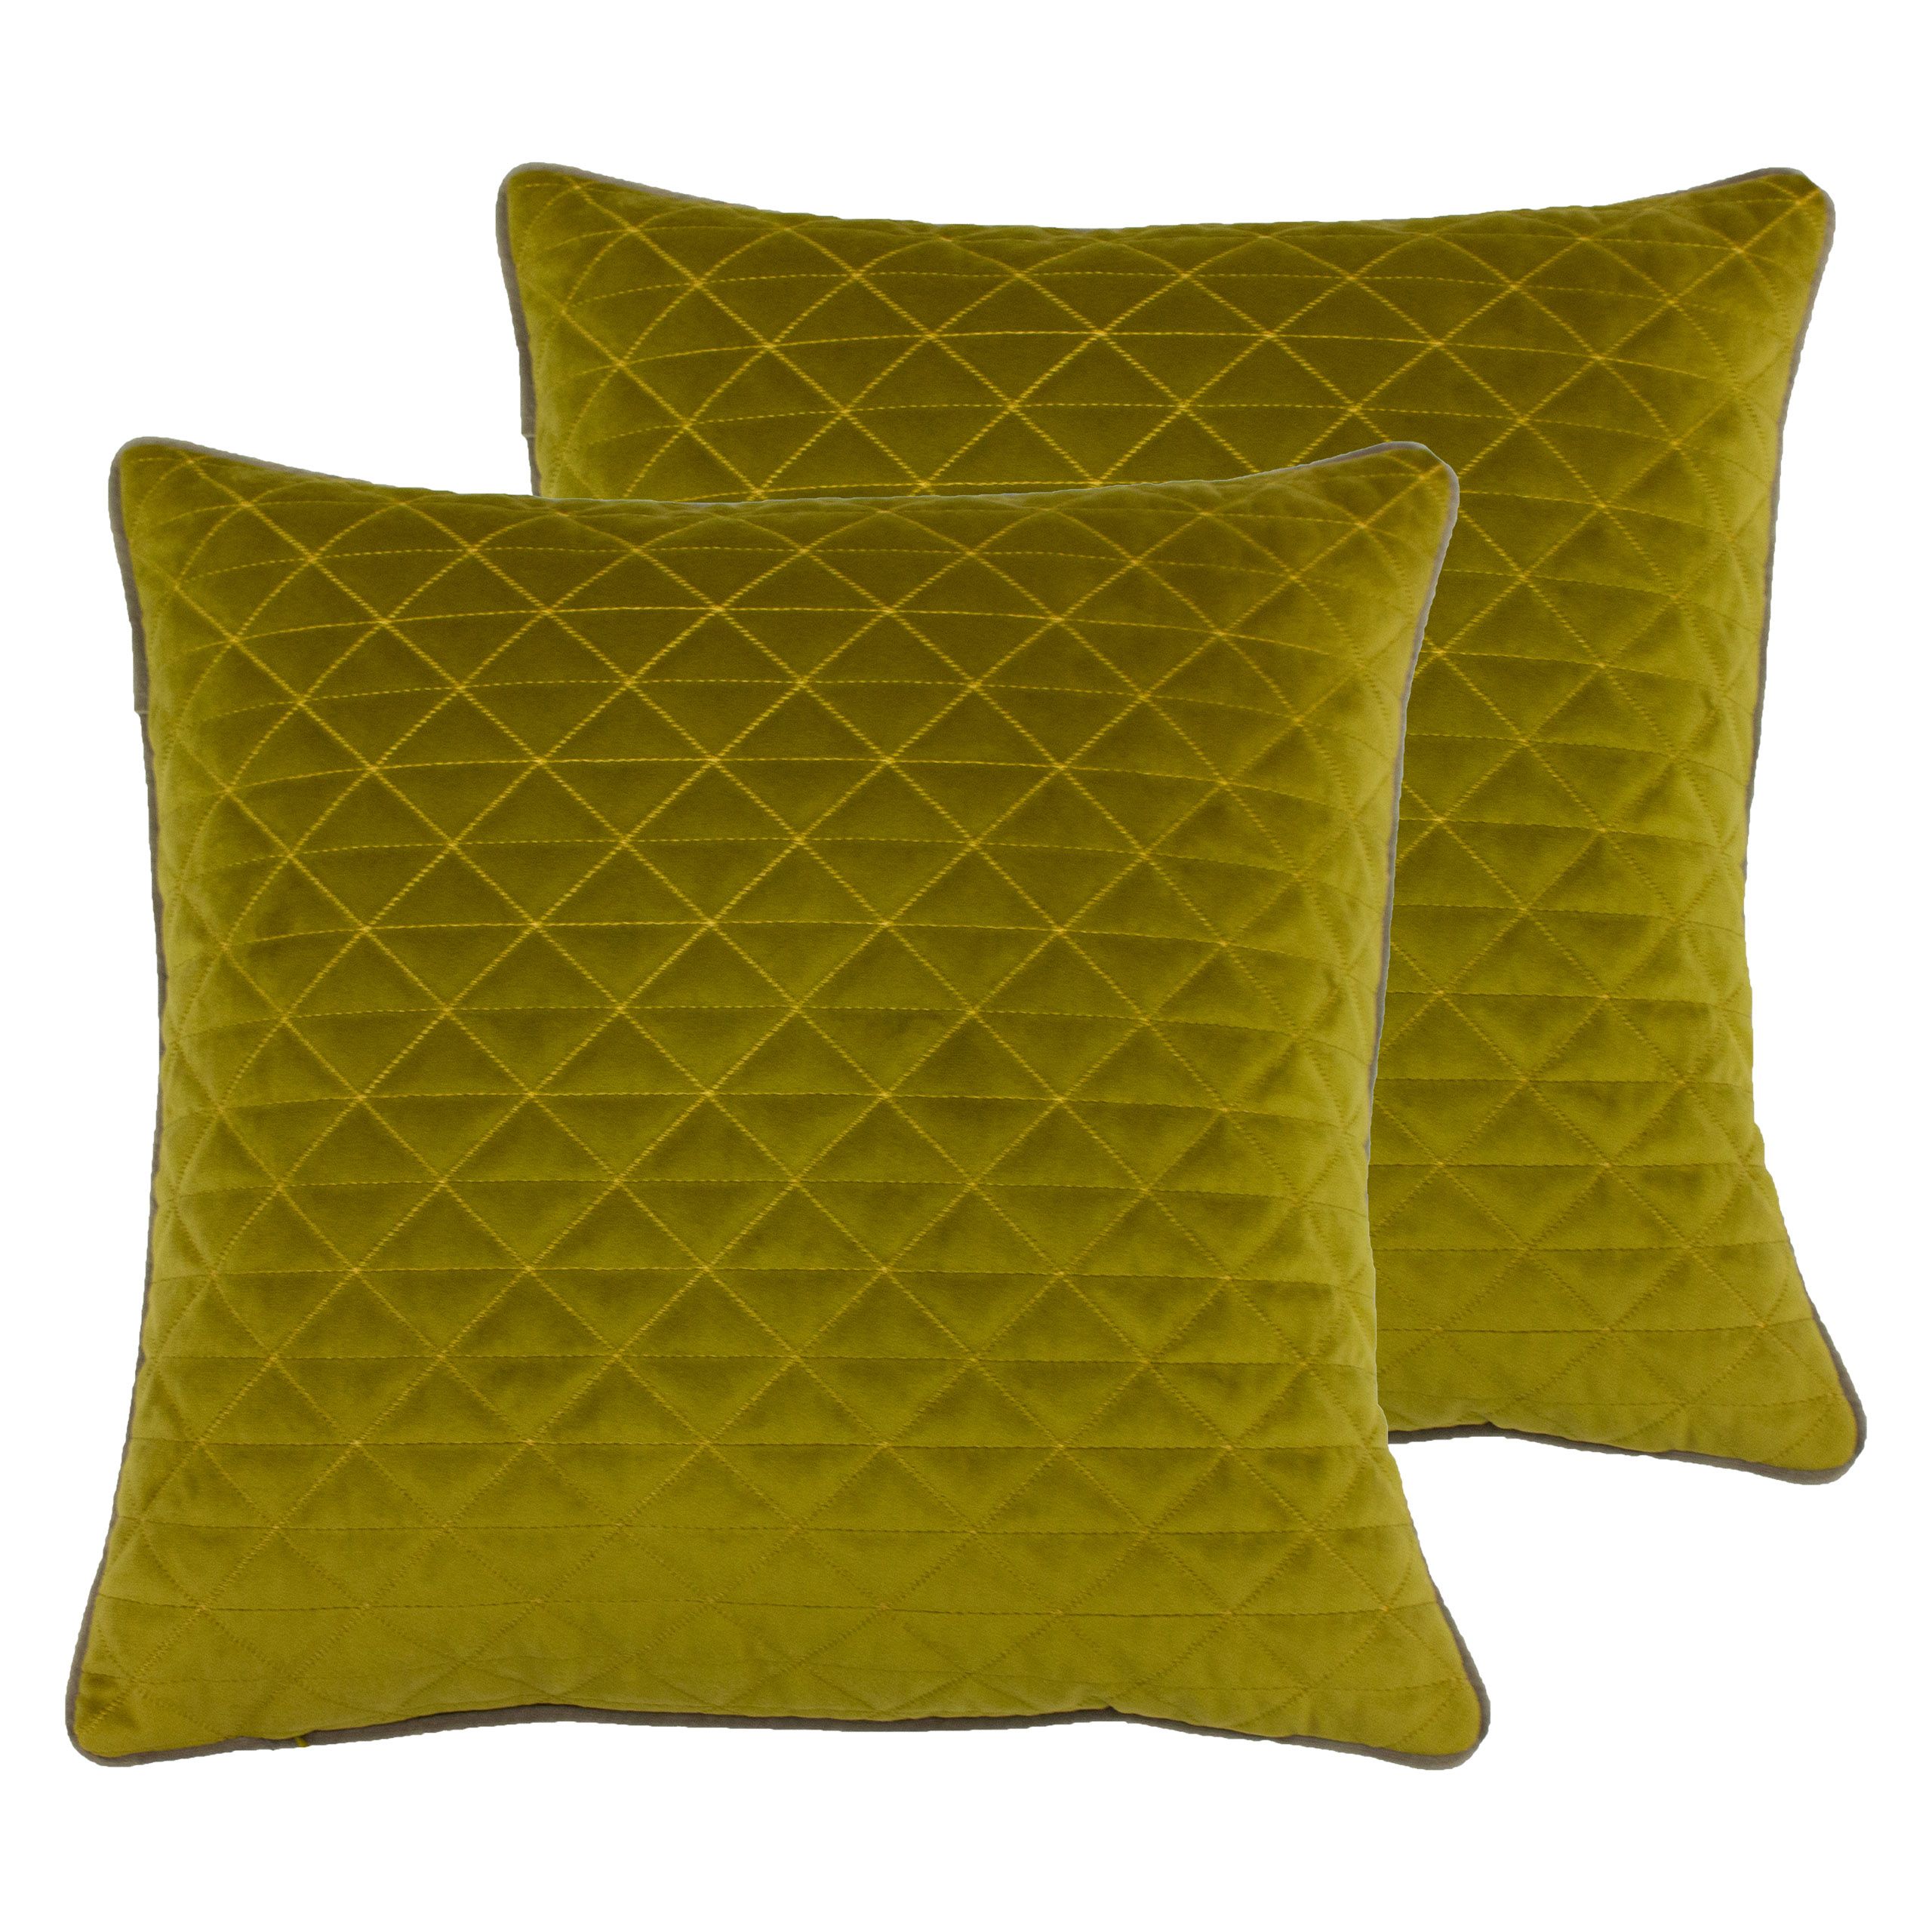 Add a pop of colour to your interior with this luxurious and comforting cushion. The geometric quilted diamond stitch adds a textured appearance that allows the richer hues to instantly pop with the contrasting piped edge and to feel anew against muted and natural-hued furnishings.